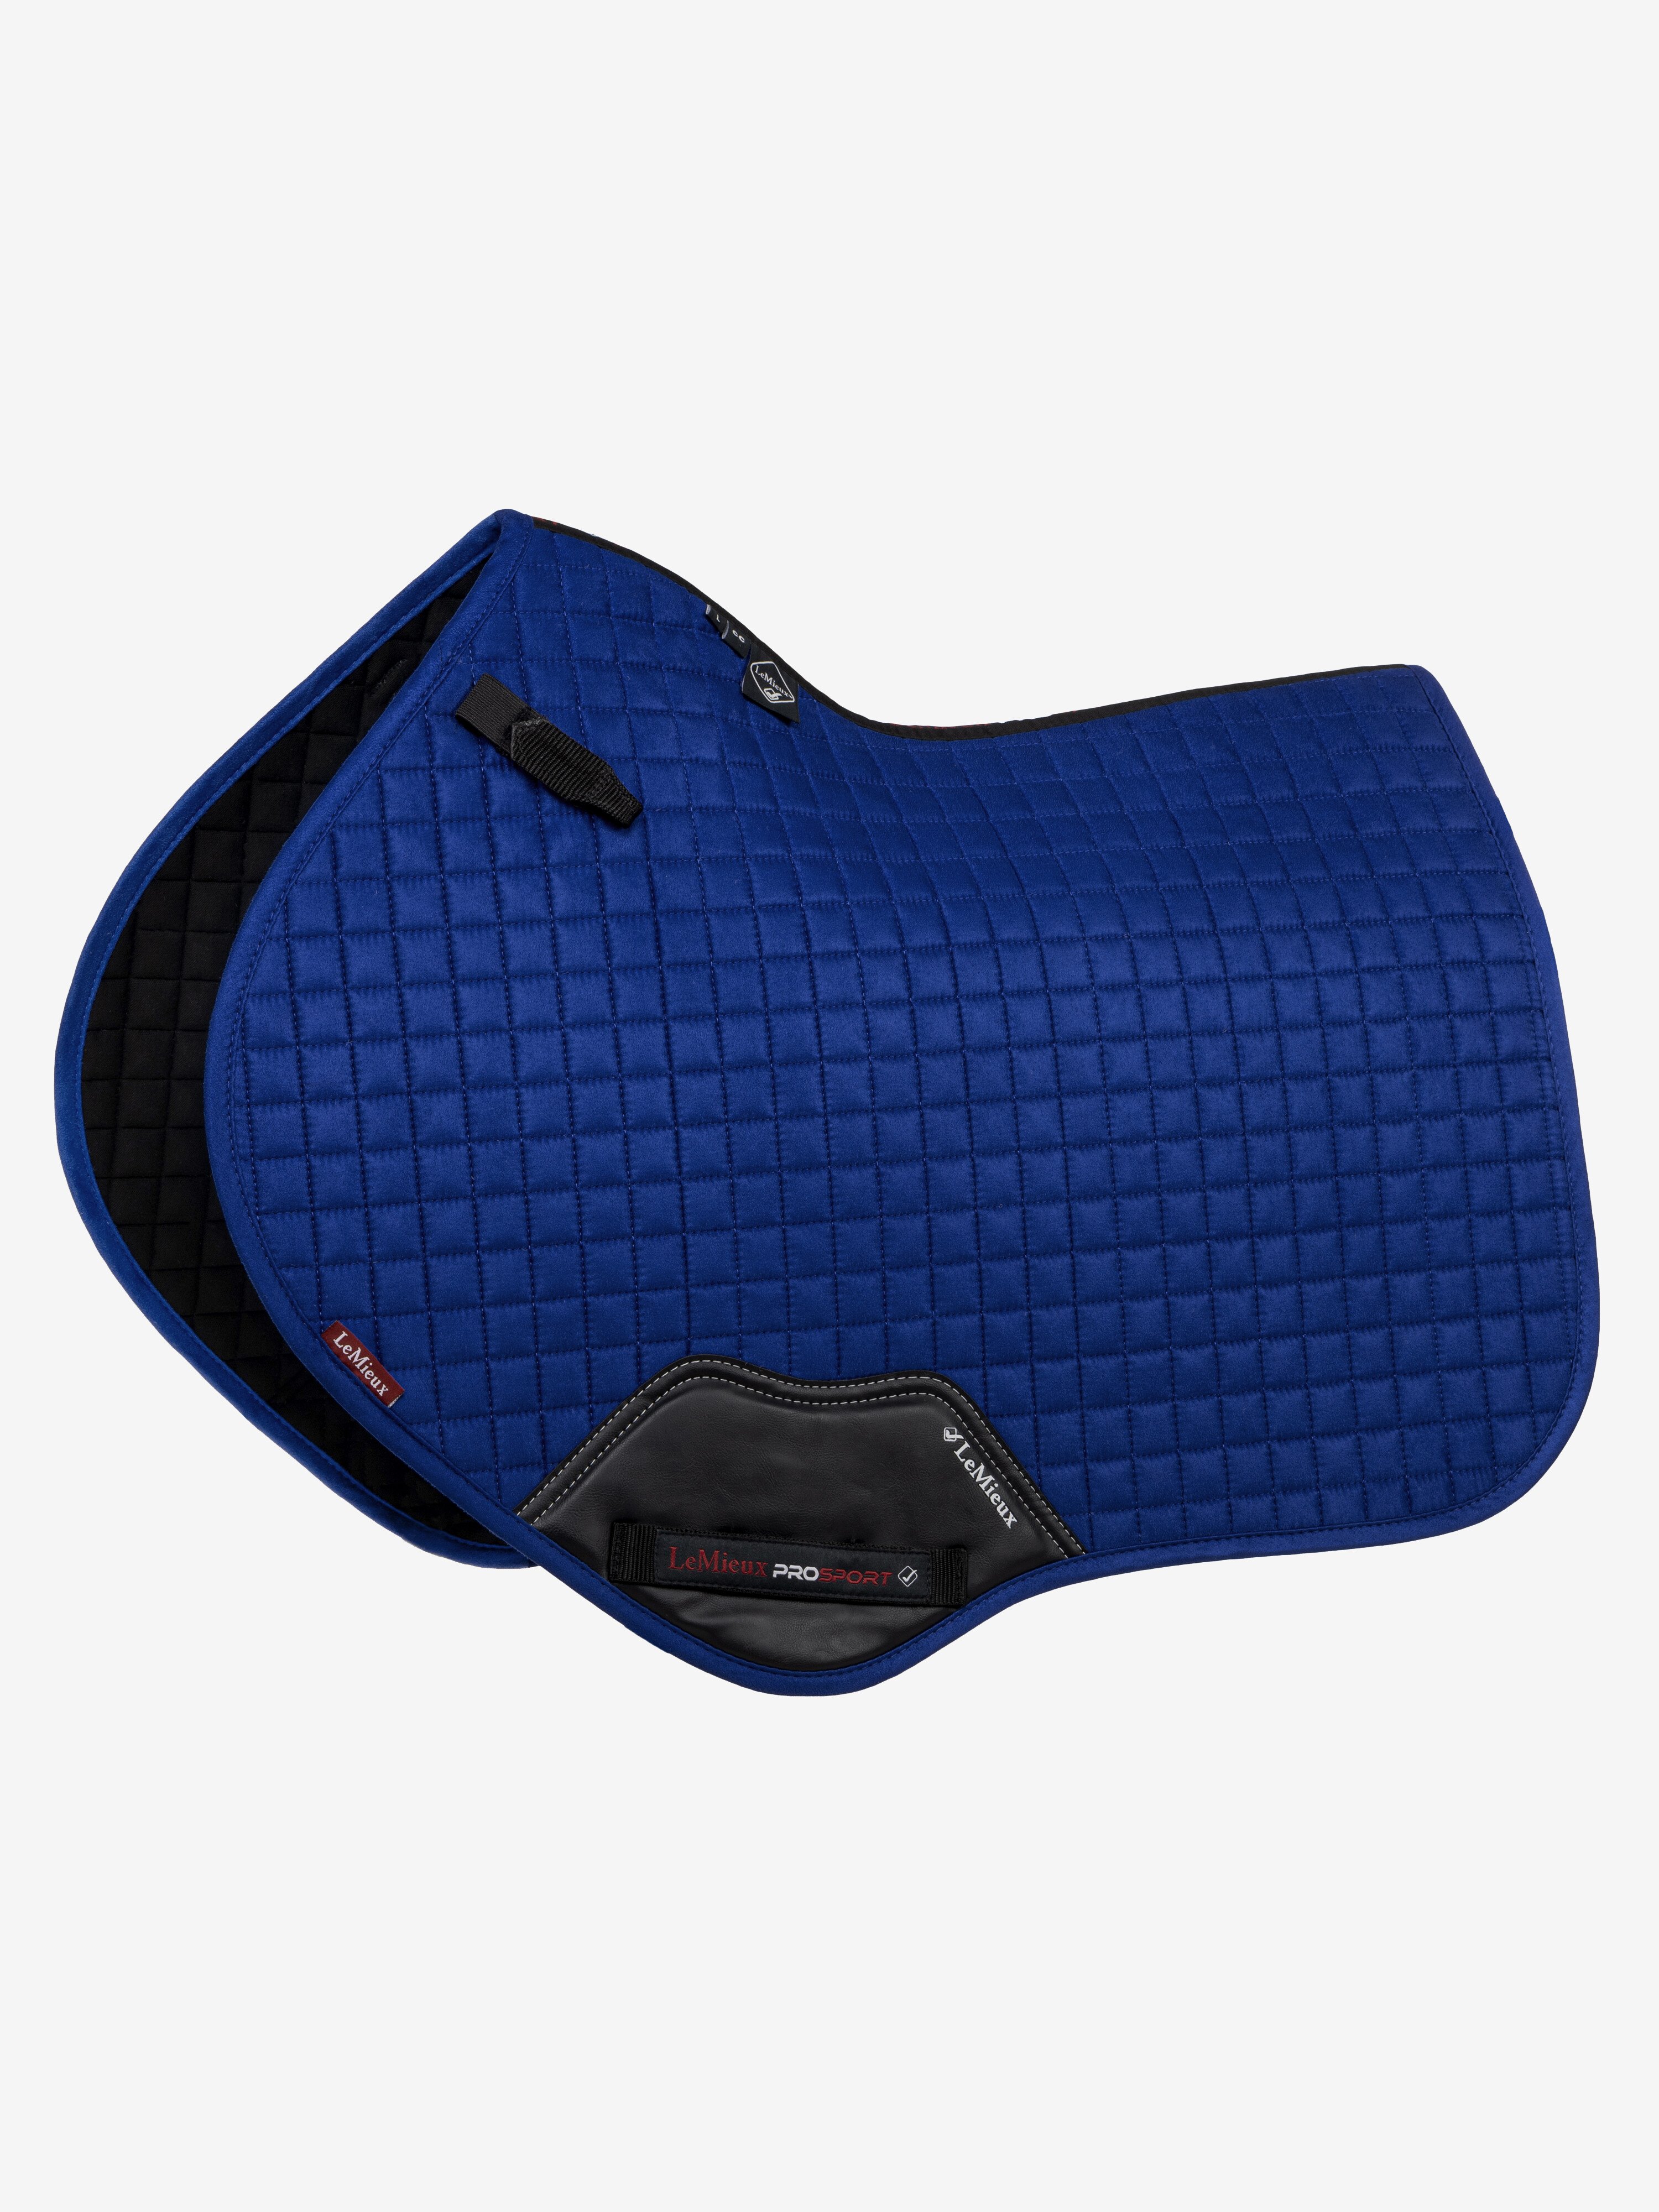 Suede Close Contact Square Benetton Saddle Pads